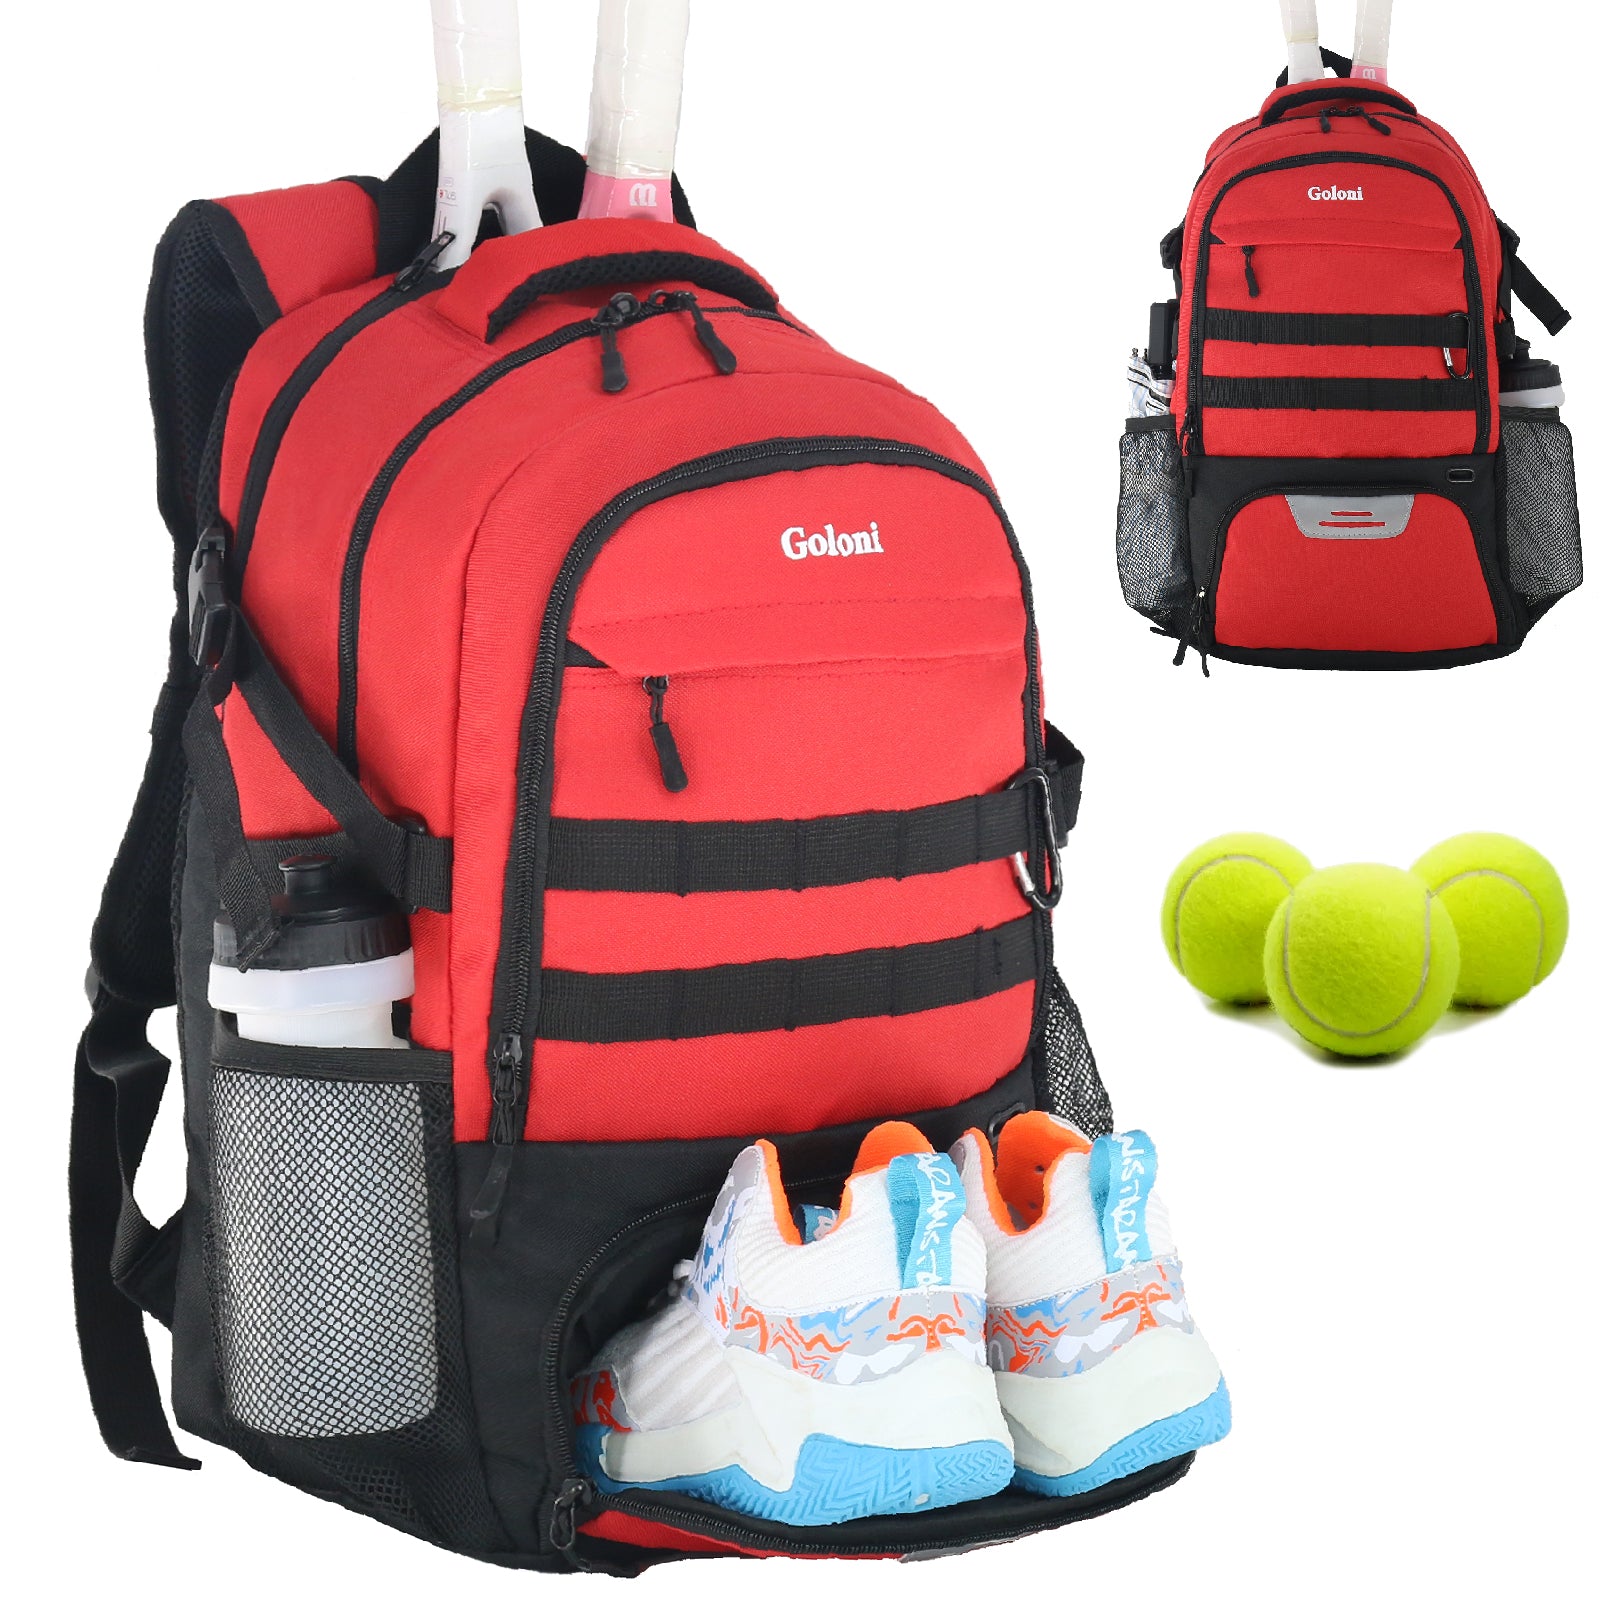 Wolt | Tennis Backpack Tennis Bag for Men Women, Large Tennis Racket Bag with Ventilated Shoe Compartment Holds 2 Rackets,Badminton Squash Racquets